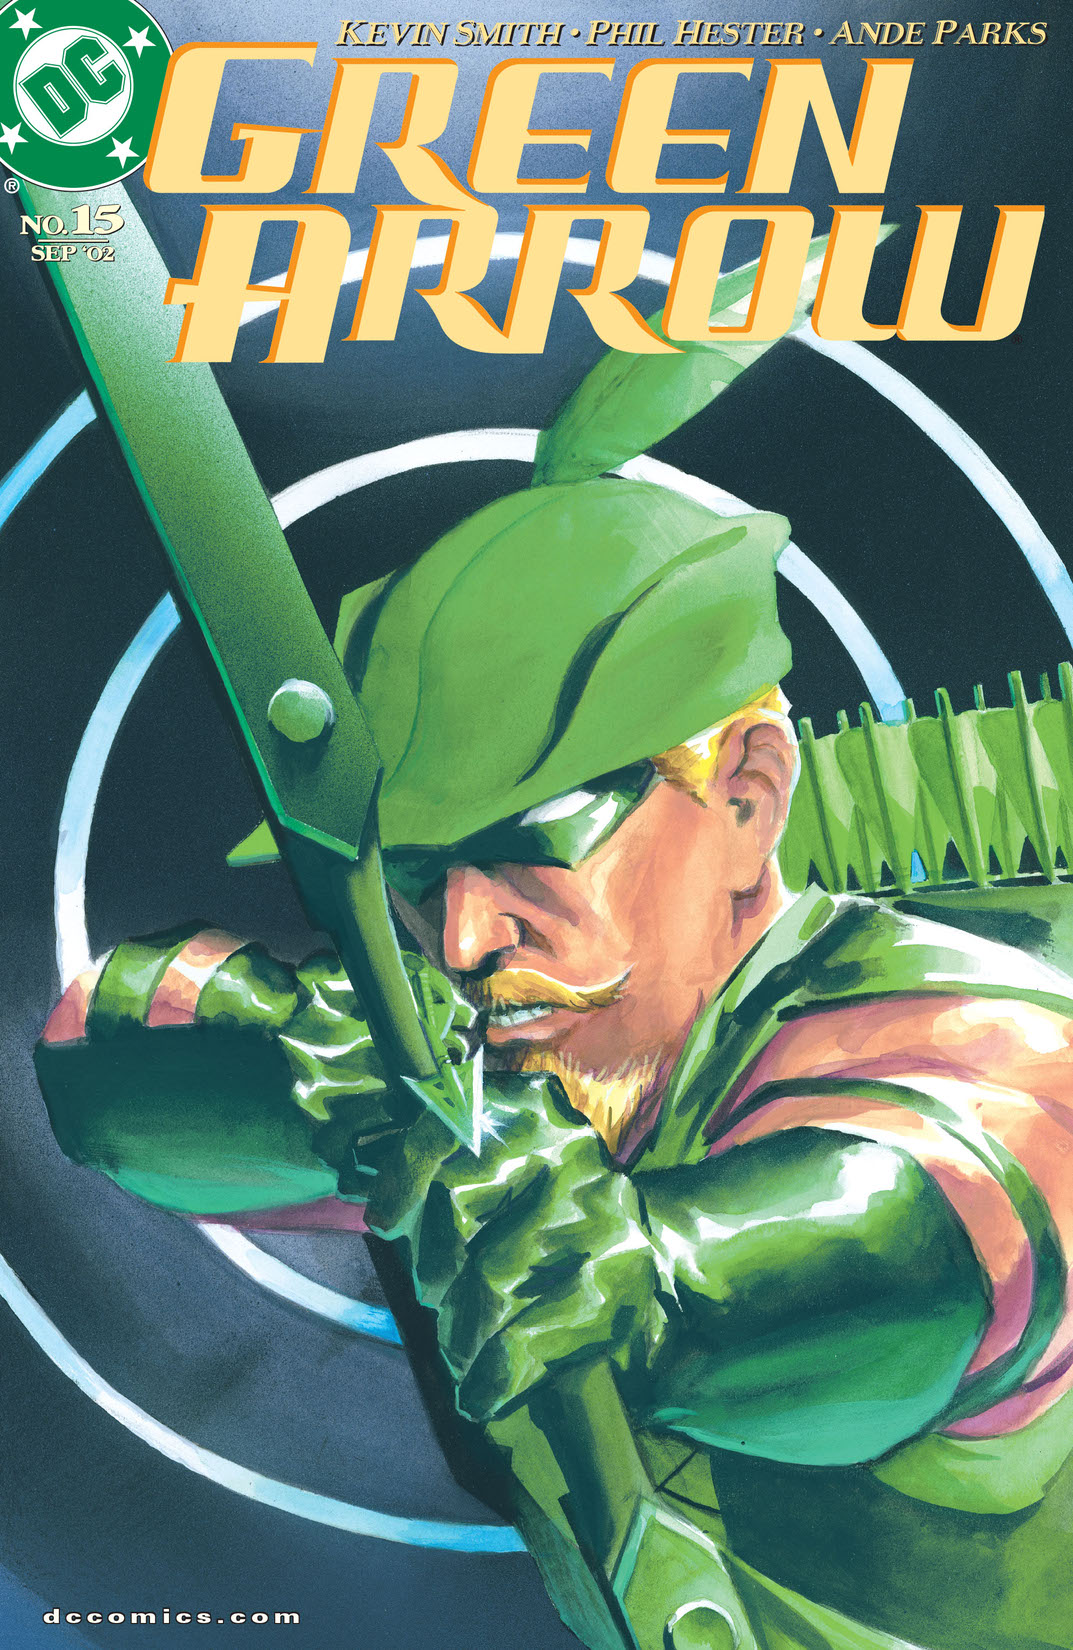 Green Arrow (2001-) #15 preview images